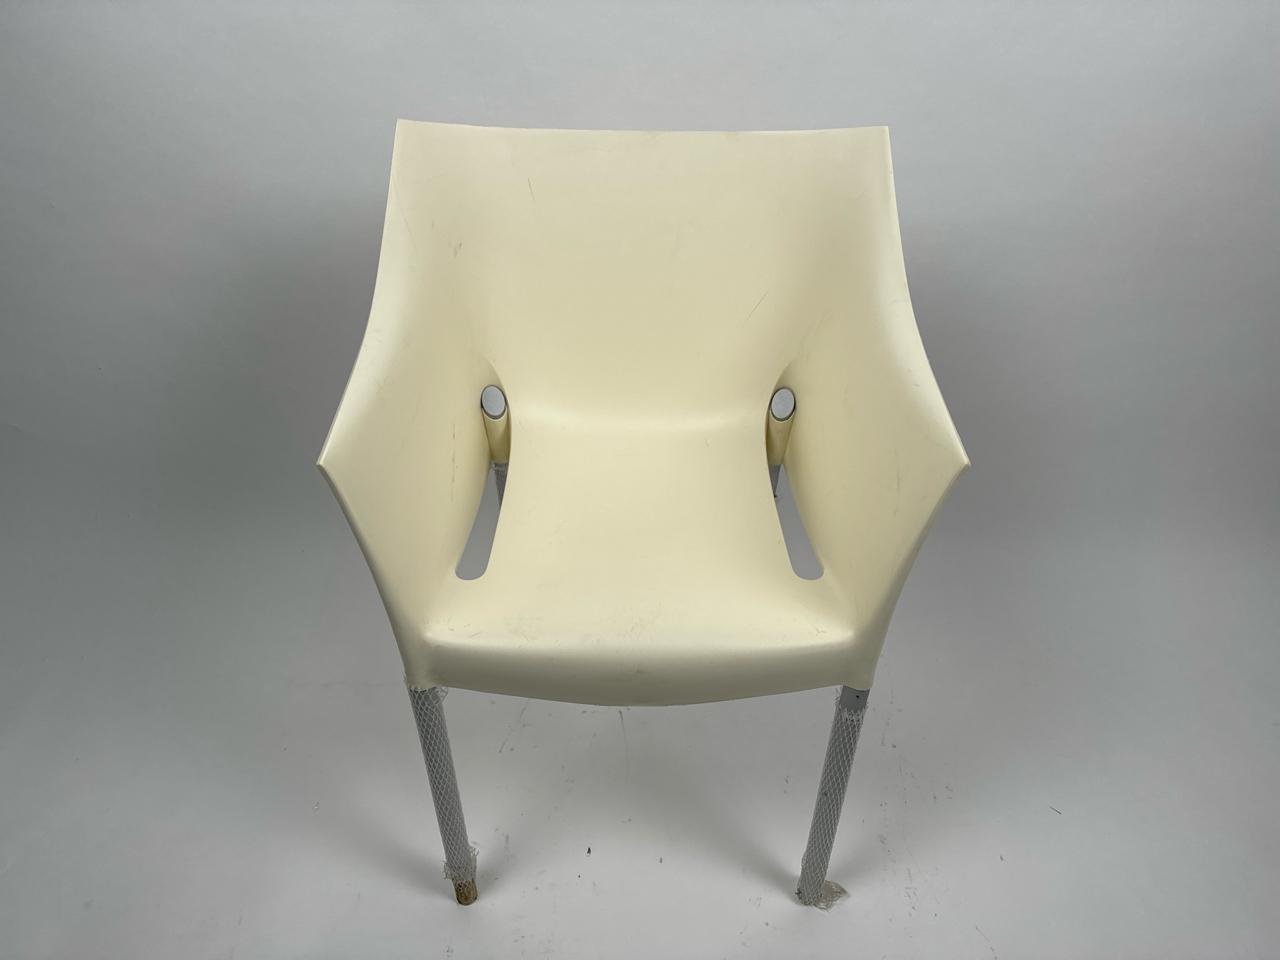 Kartell Dr No Chair - Image 2 of 3